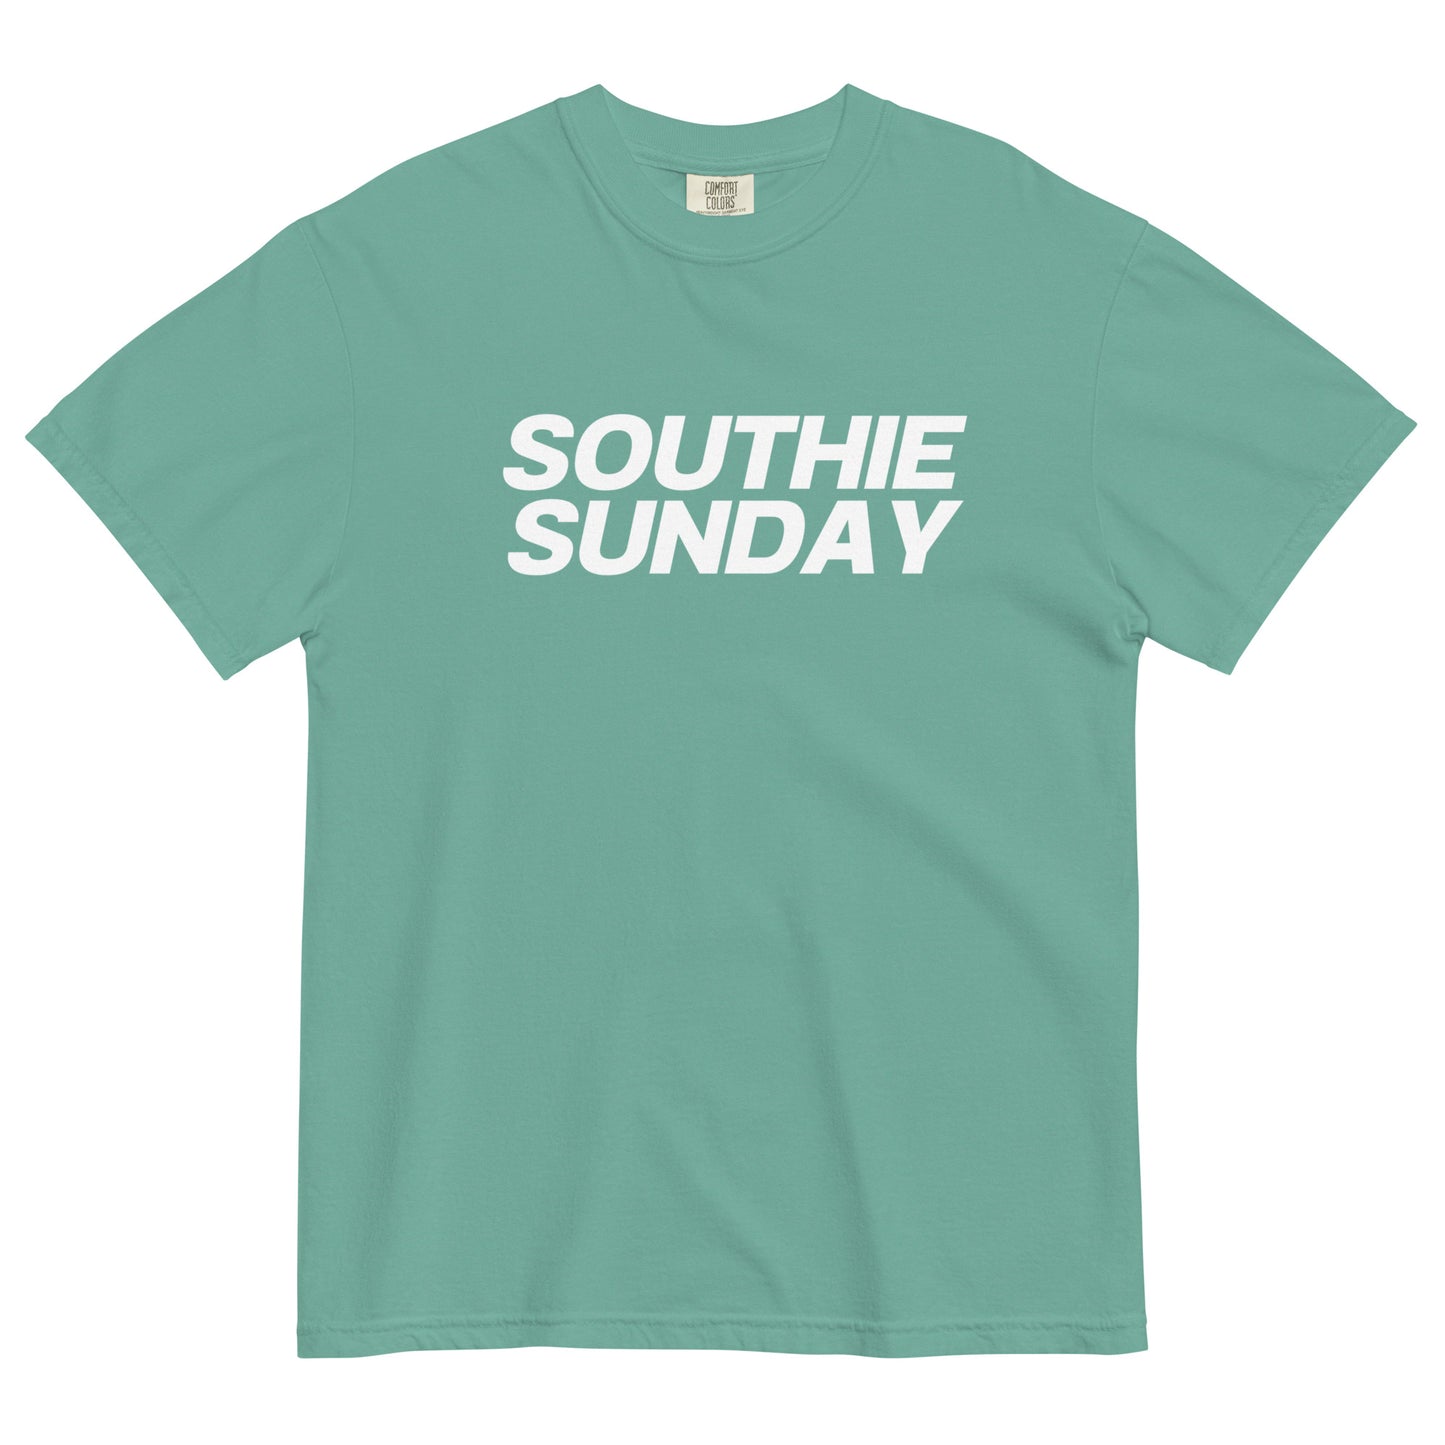 seafoam green tshirt that says "southie sunday" in white lettering